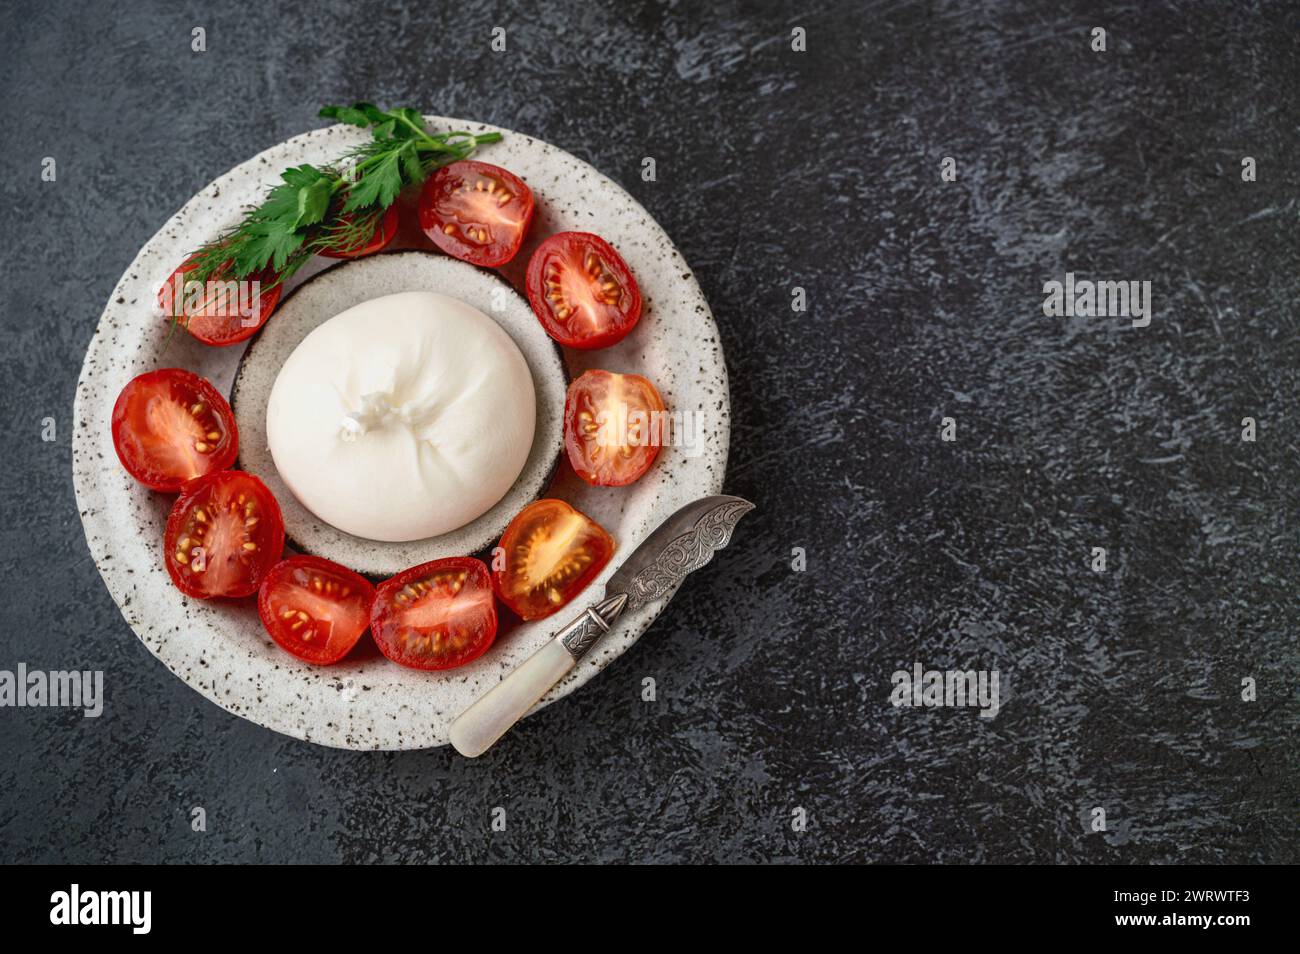 burrata with tomatoes. Caprese salad with tomatoes, burrata cheese and herbs. Soft cheese in a burrata bag. Copy space, Top view, flat lay. Stock Photo